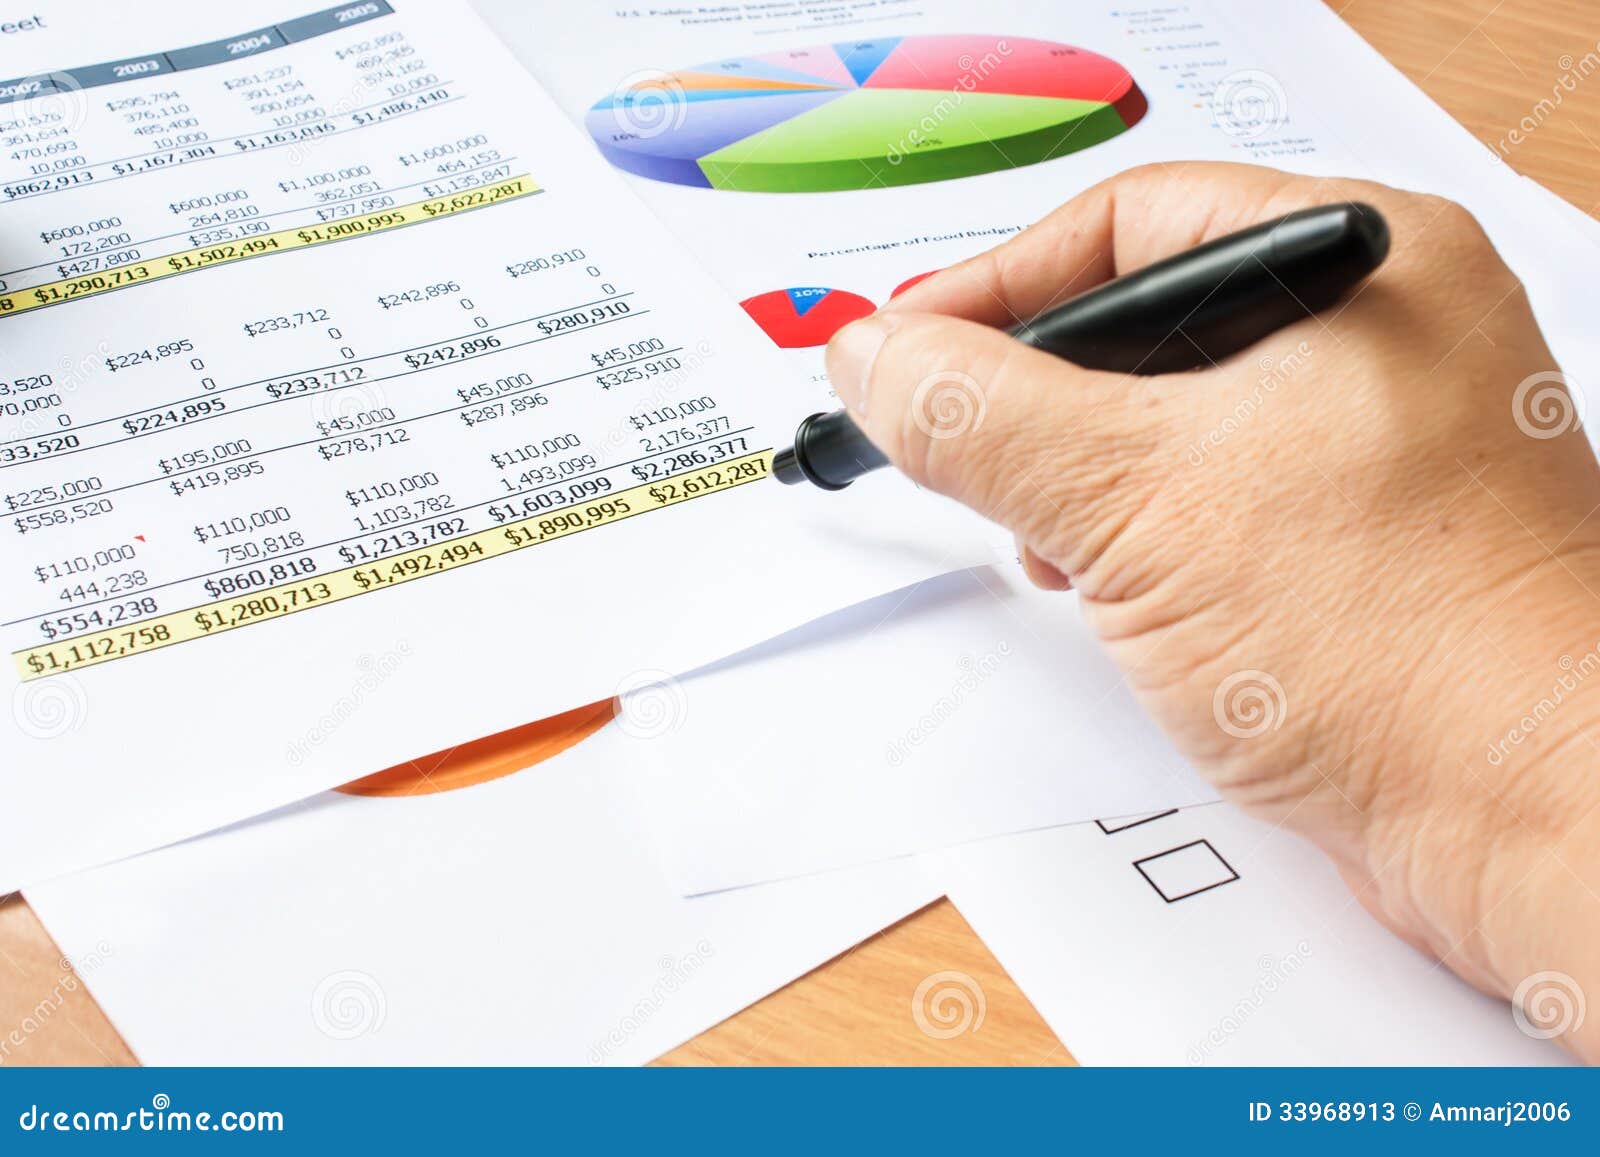 Chack income stock image. Image of analyze, computer - 33968913